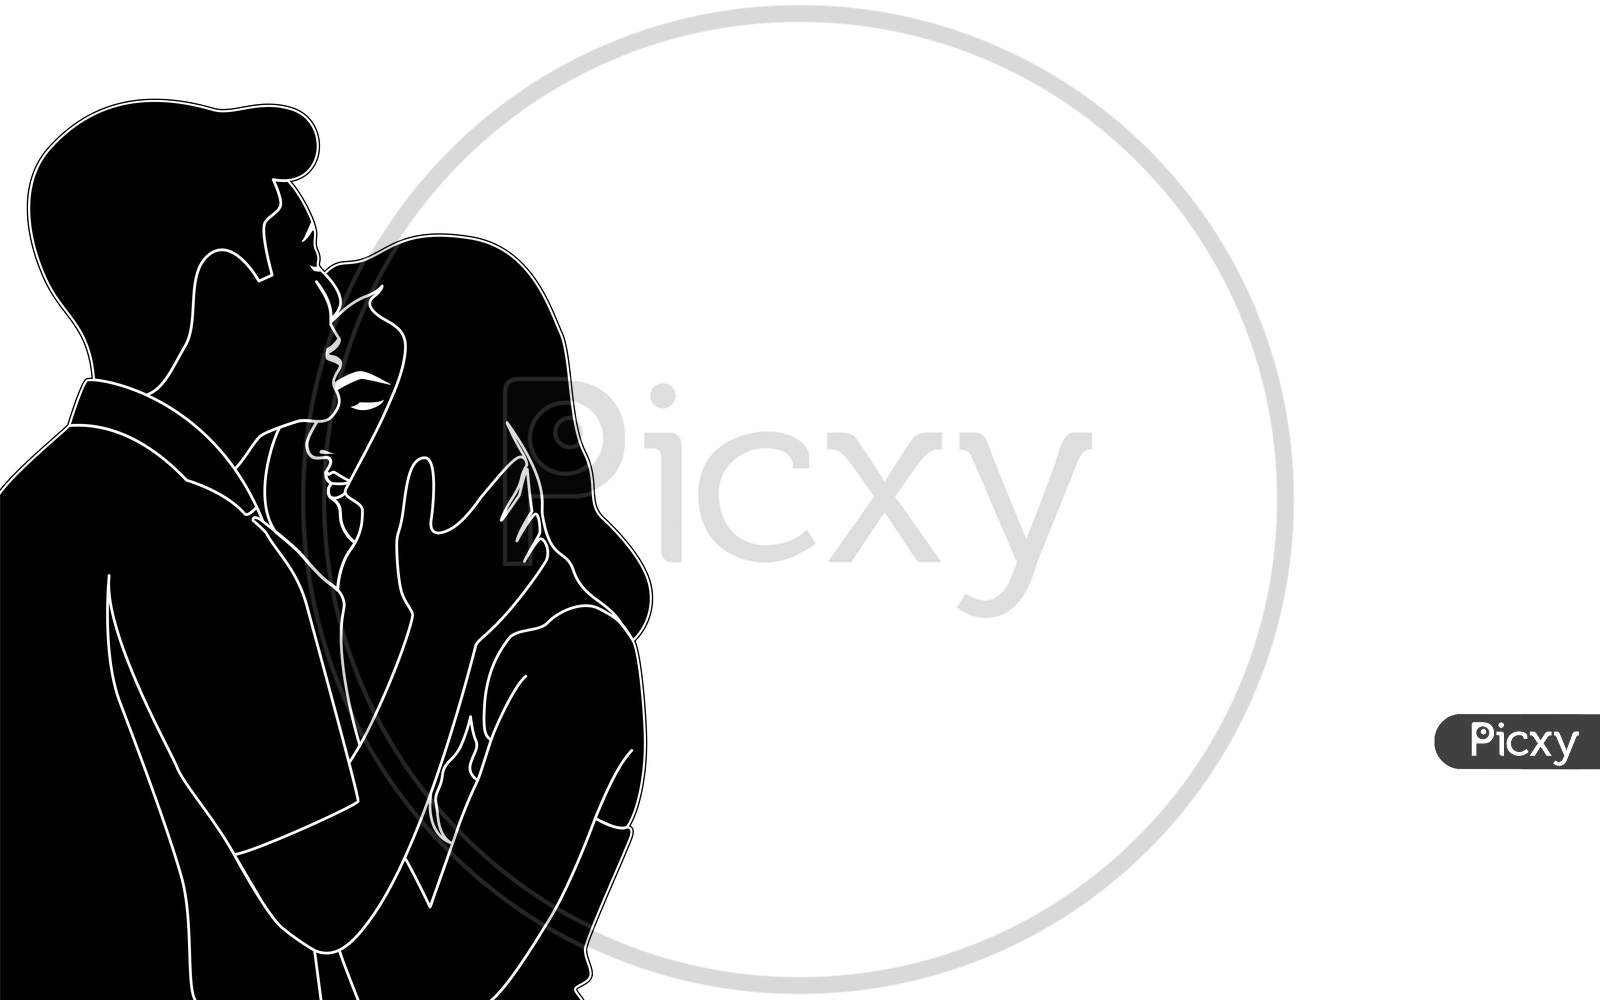 Boy Kissing On Girls Forehead, Beautiful Teen Couple Character Silhouette Vector Illustration.